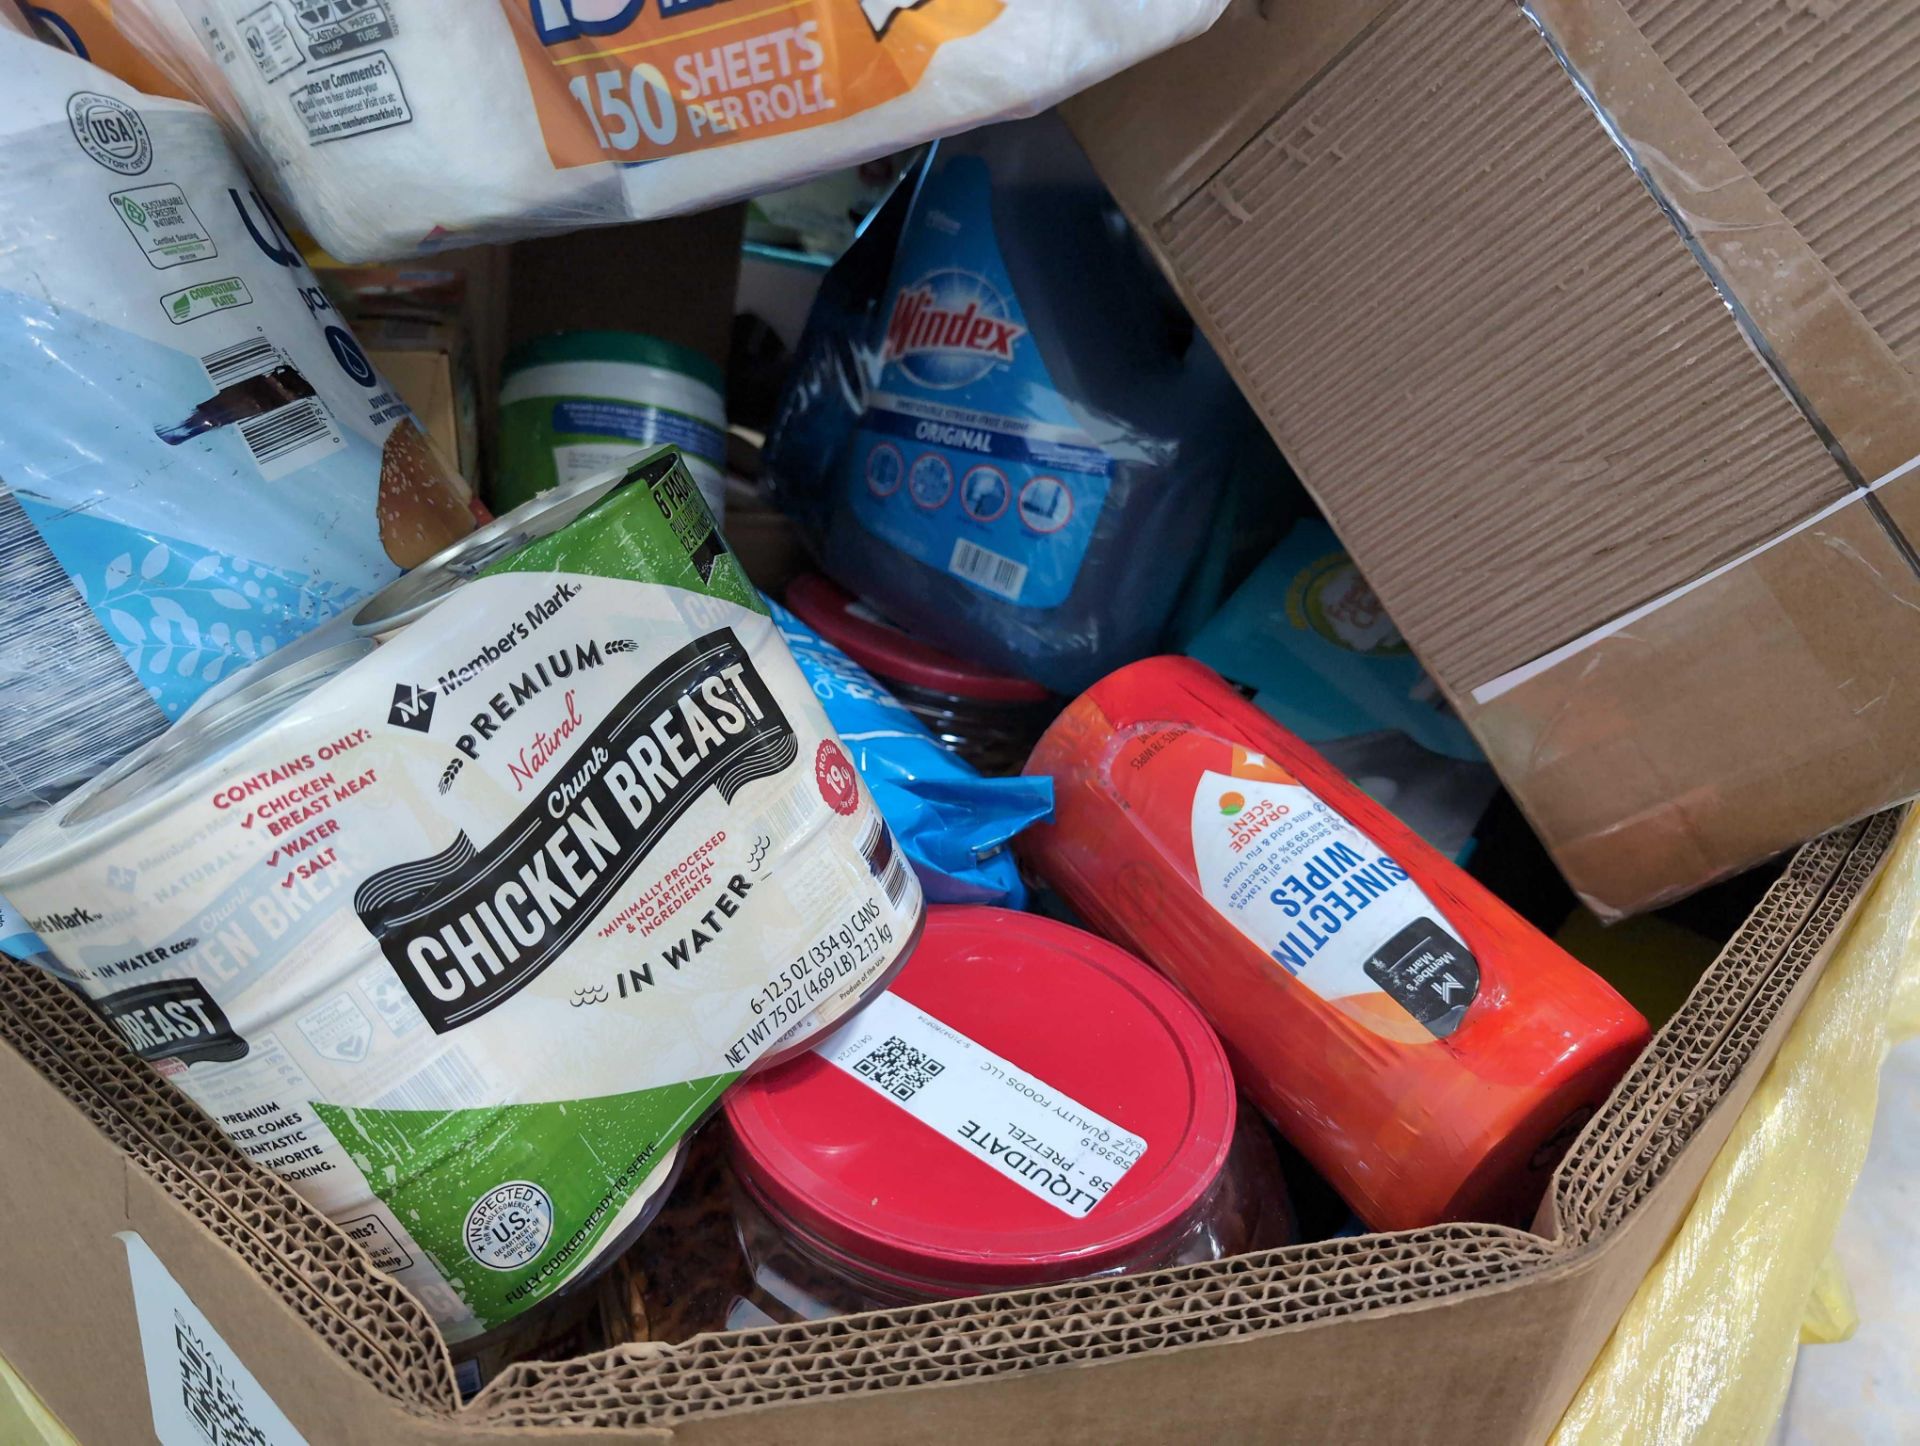 Big box store in a box: Canned chicke, Paper towels, baket chips, ketchup, trash liners, Cubii seate - Image 6 of 14